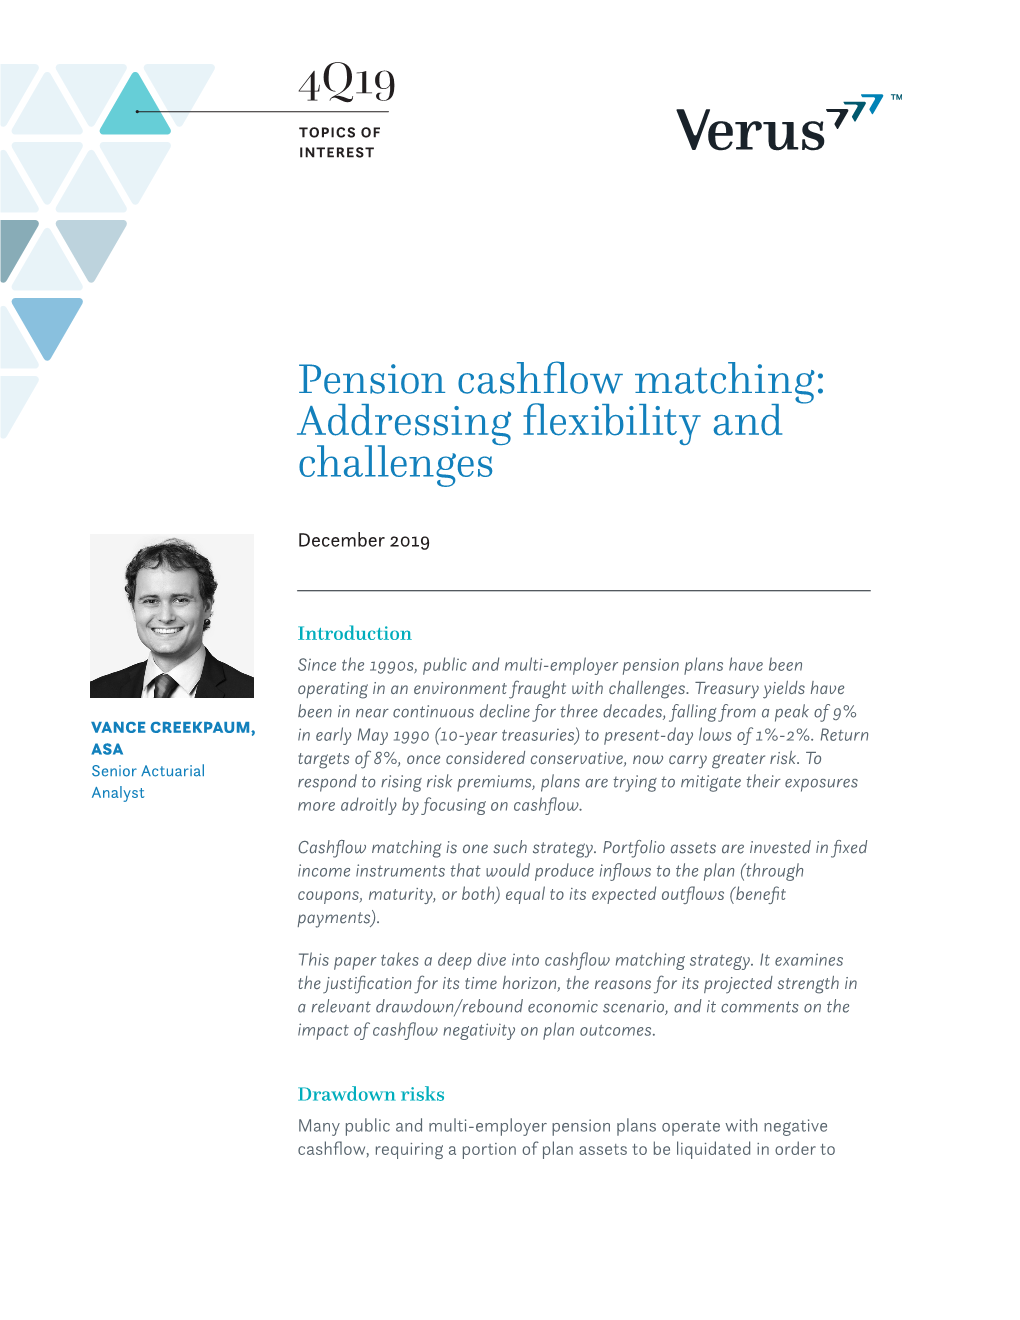 Pension Cashflow Matching: Addressing Flexibility and Challenges